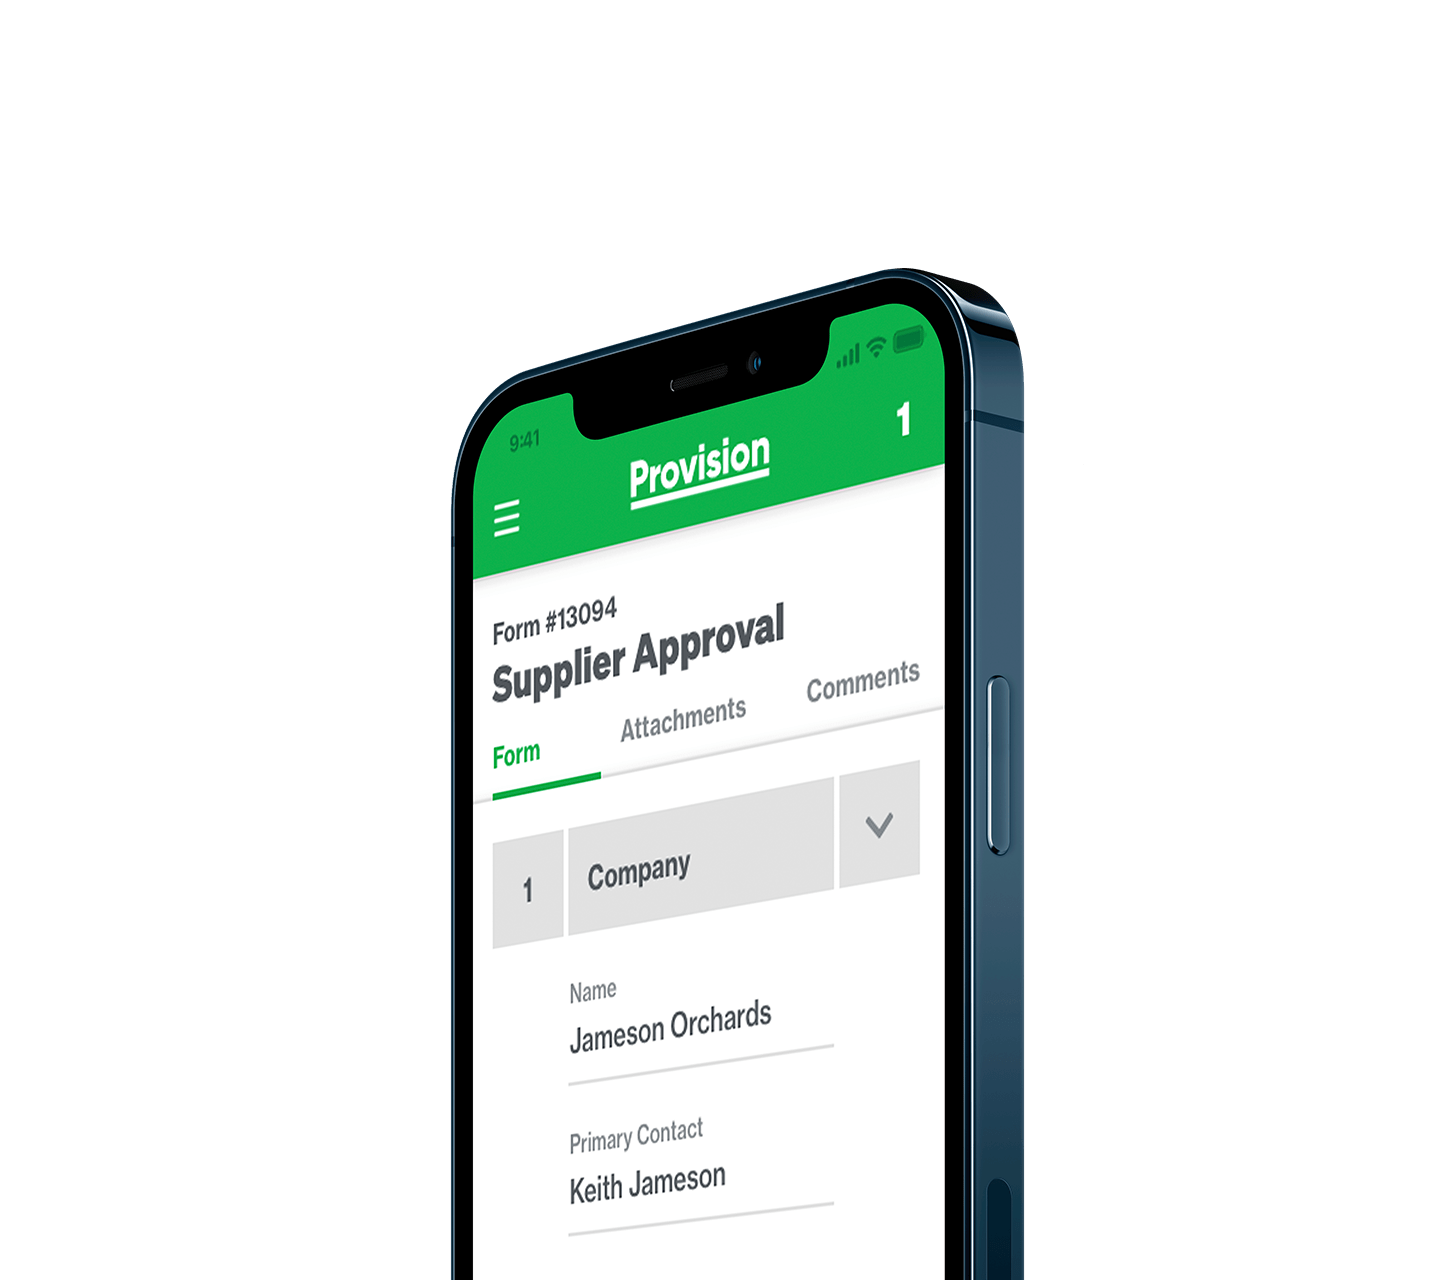 Supplier approval form